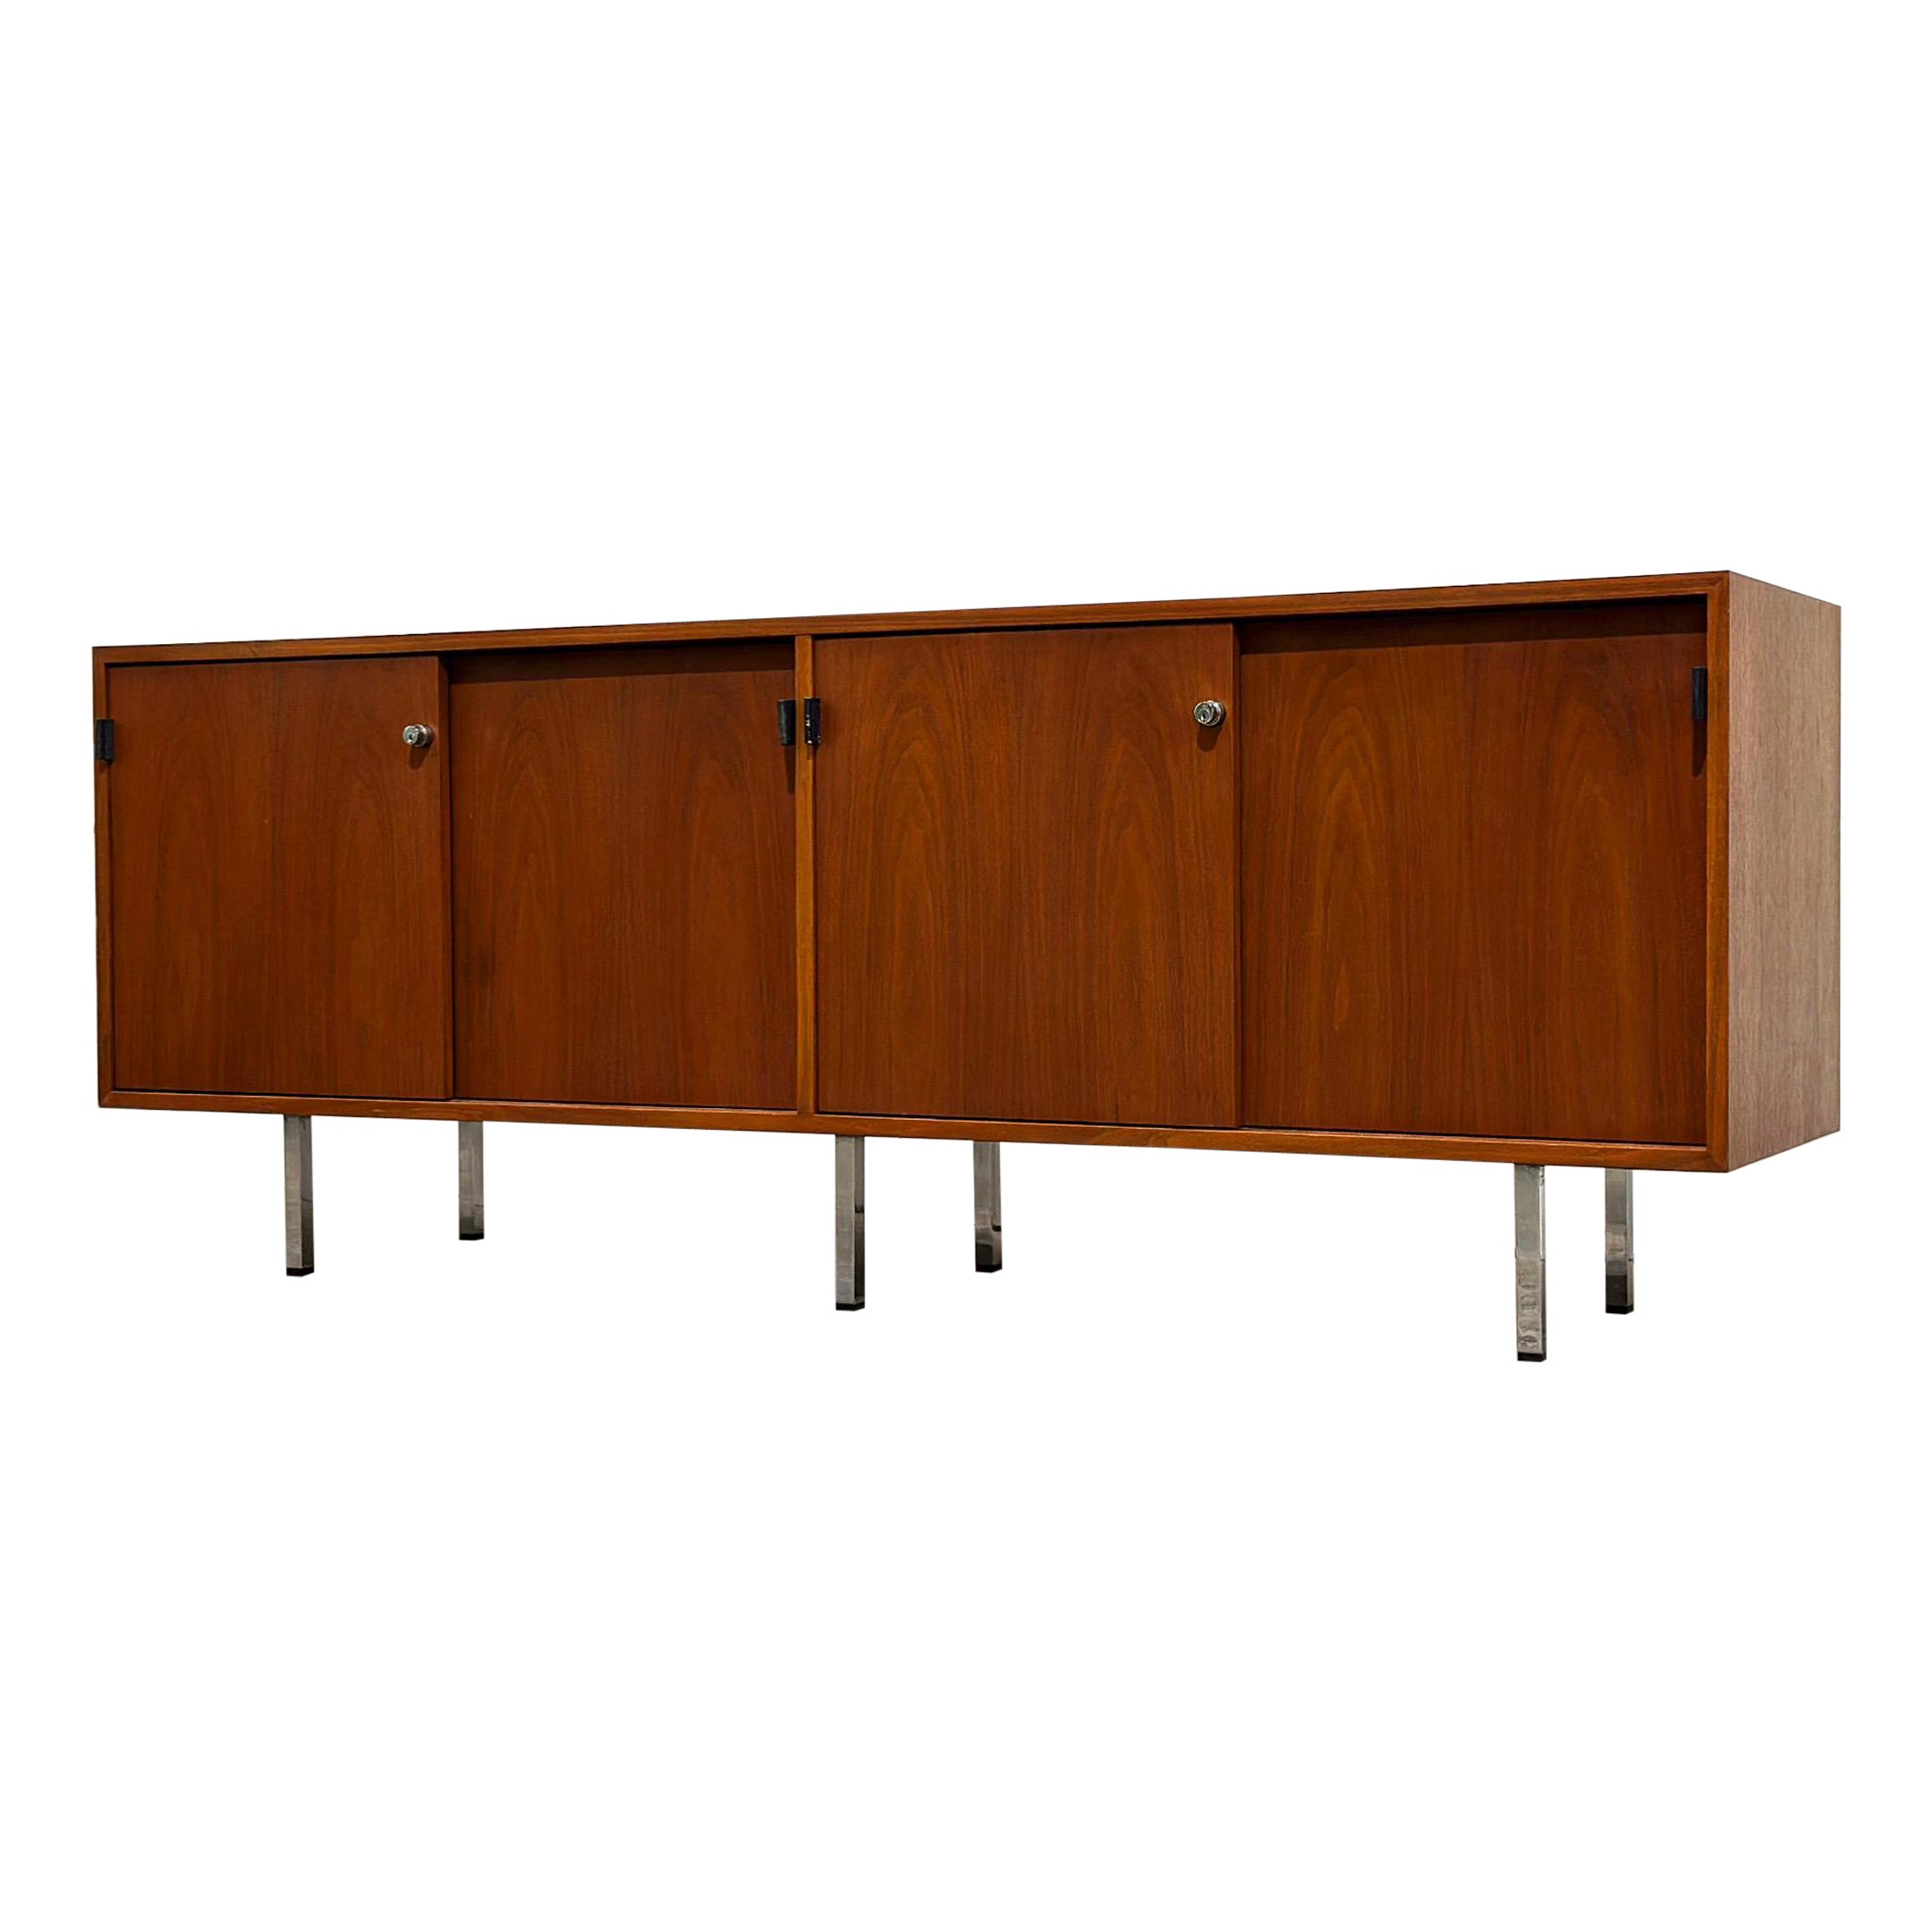 Vintage Midcentury Florence Knoll Credenza - Walnut + Chrome + Leather For Sale